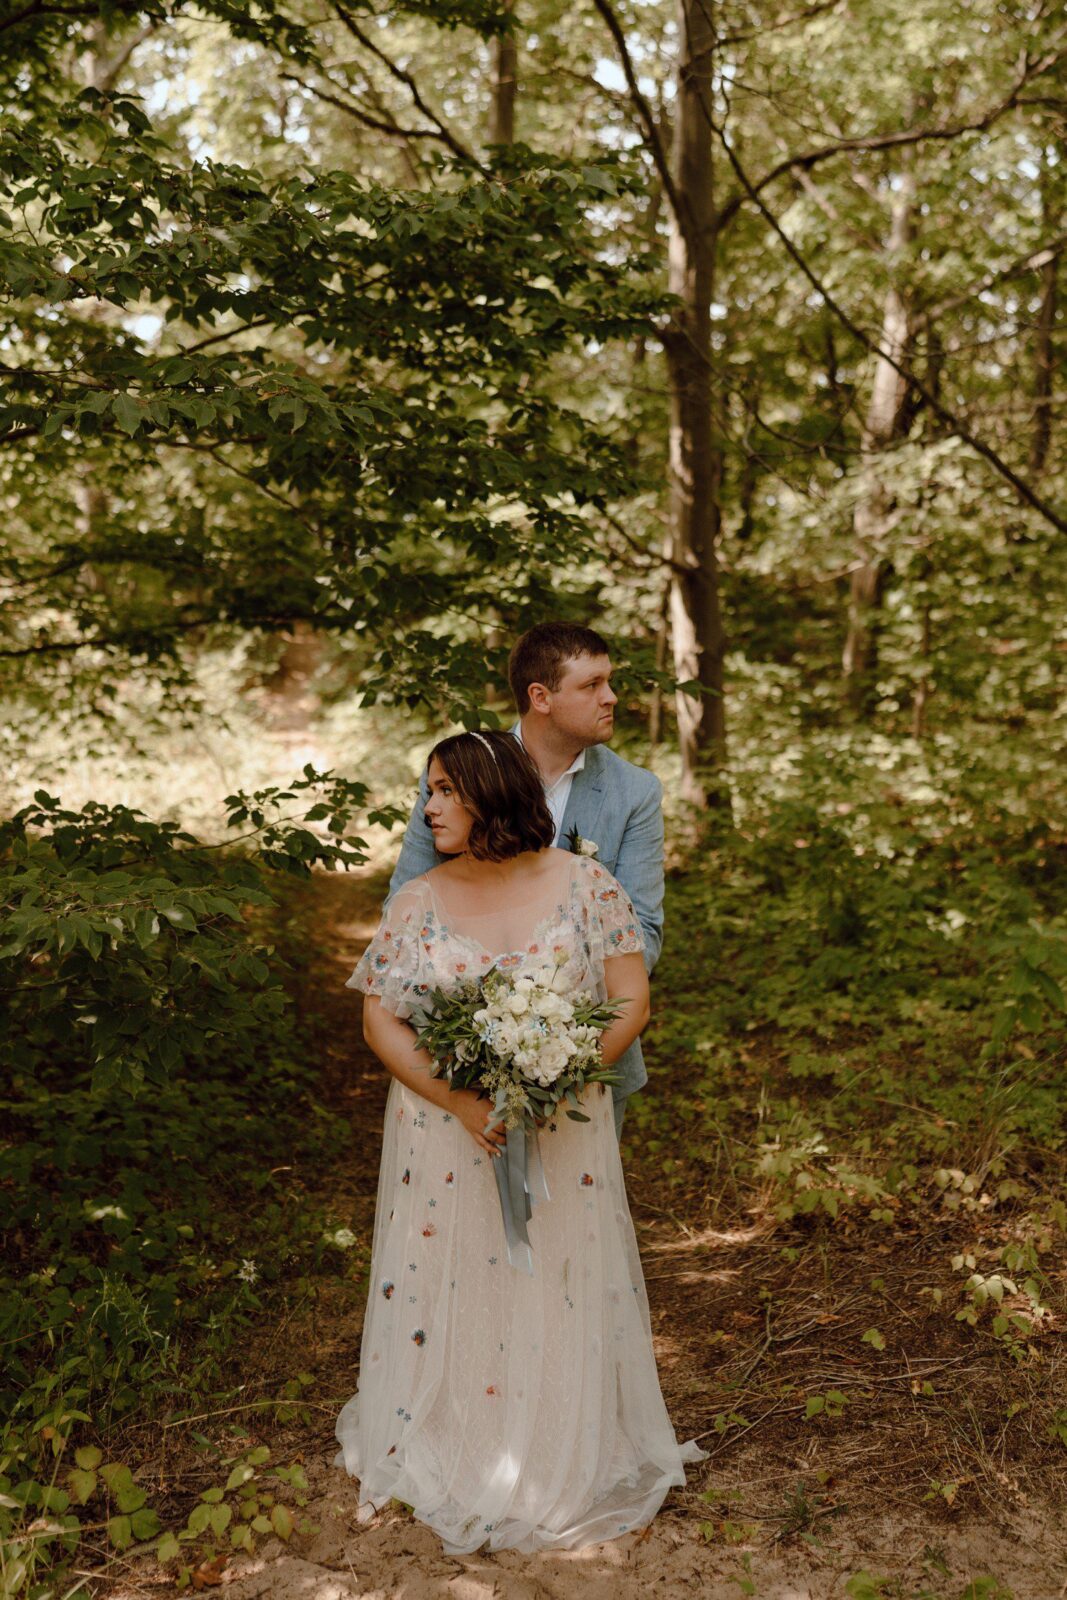 Intimate Lake Michigan Forest Wedding at Kirk Park | Cassidy Lynne